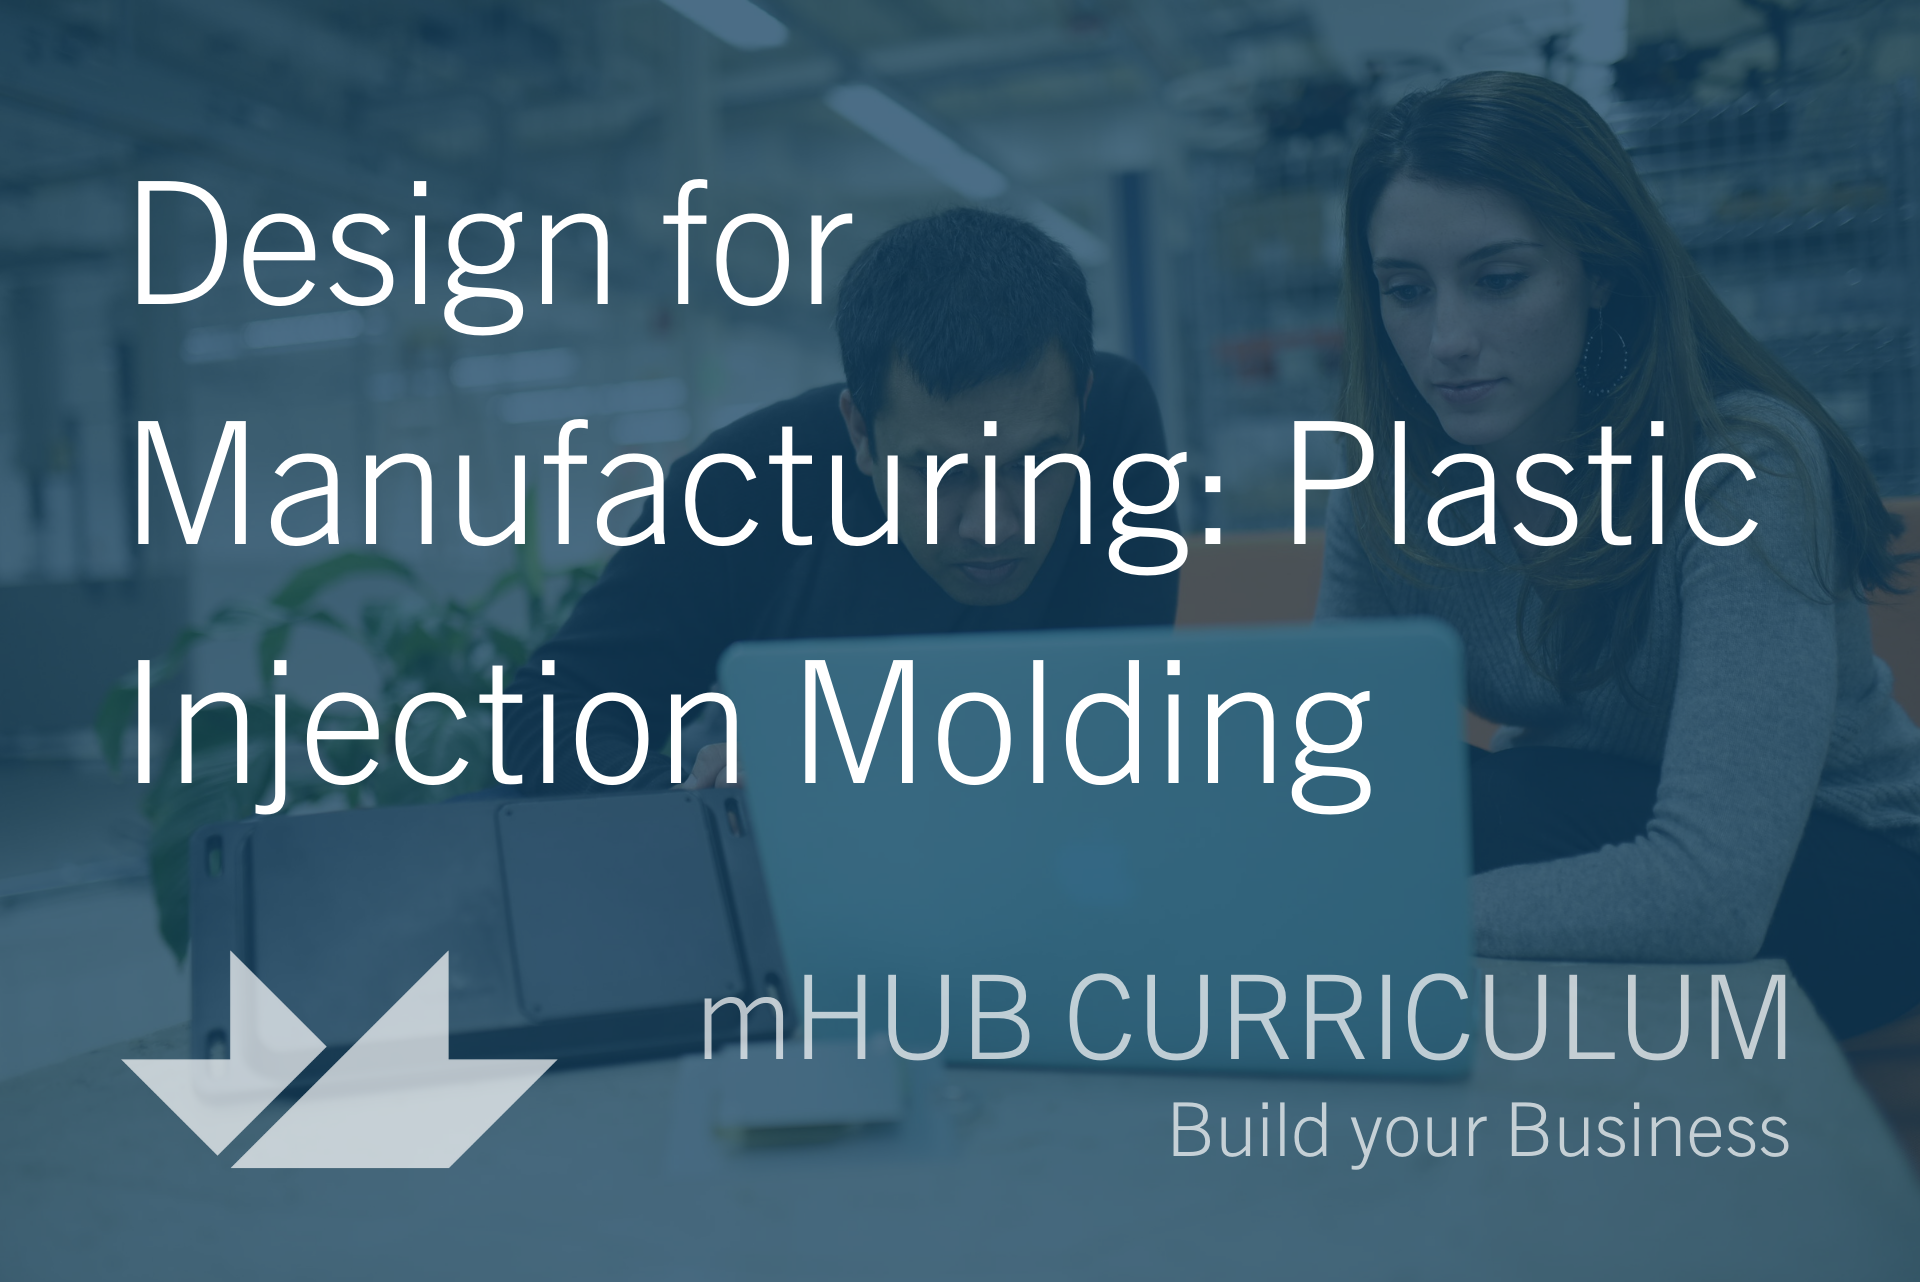 Design for Manufacturing: Plastic Injection Molding